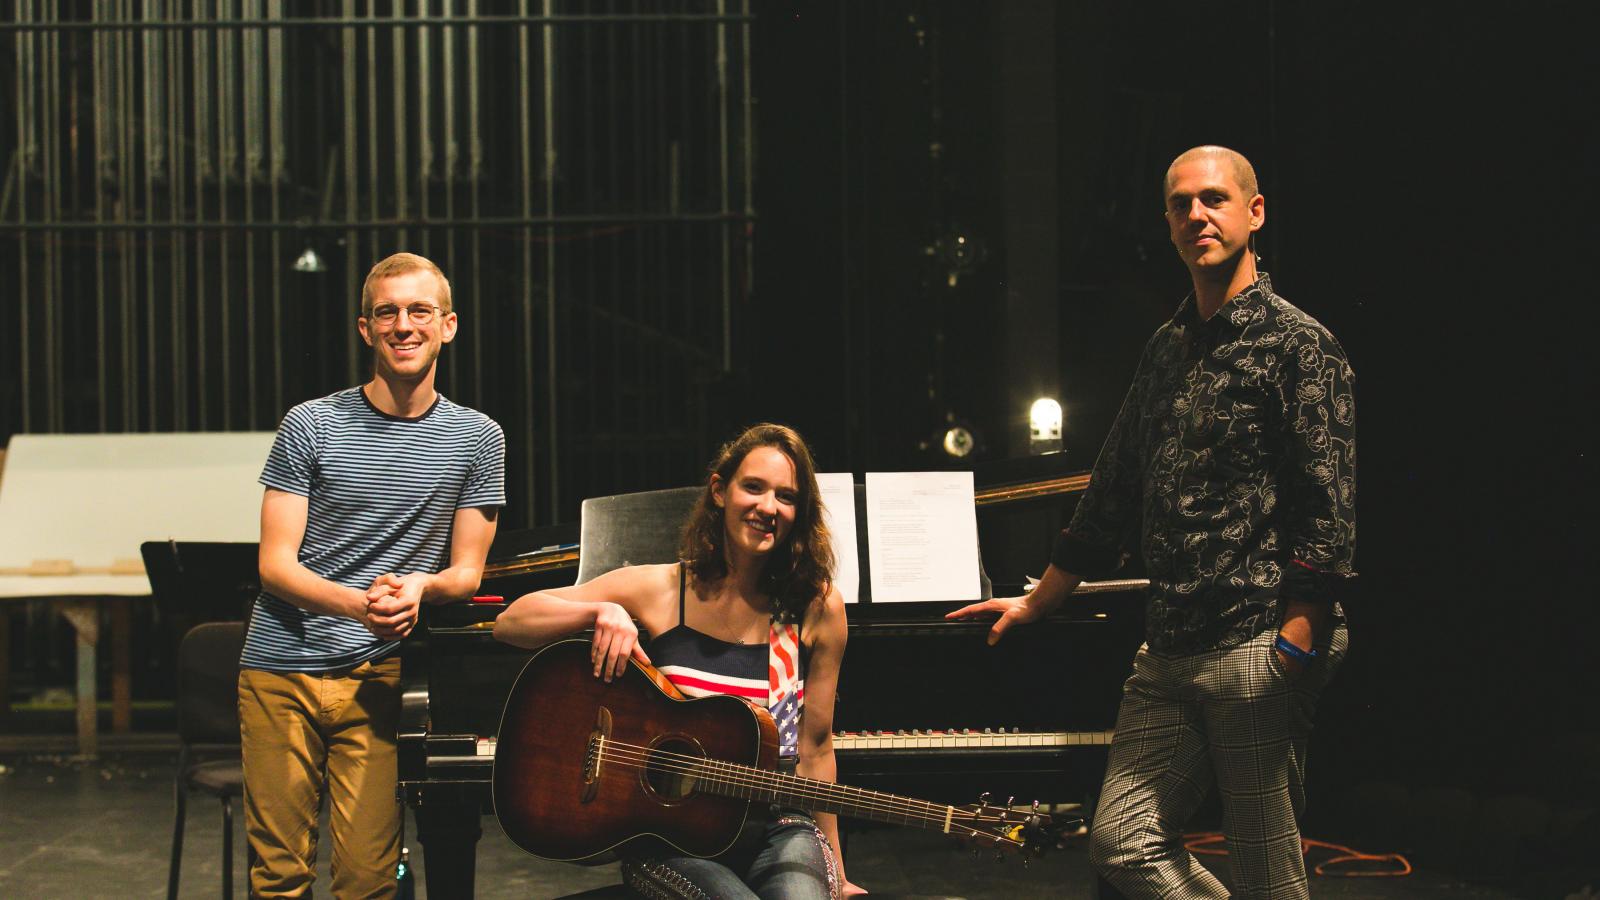 A young woman sits on a piano bench holding a guitar while two men stand casually leaning on the piano